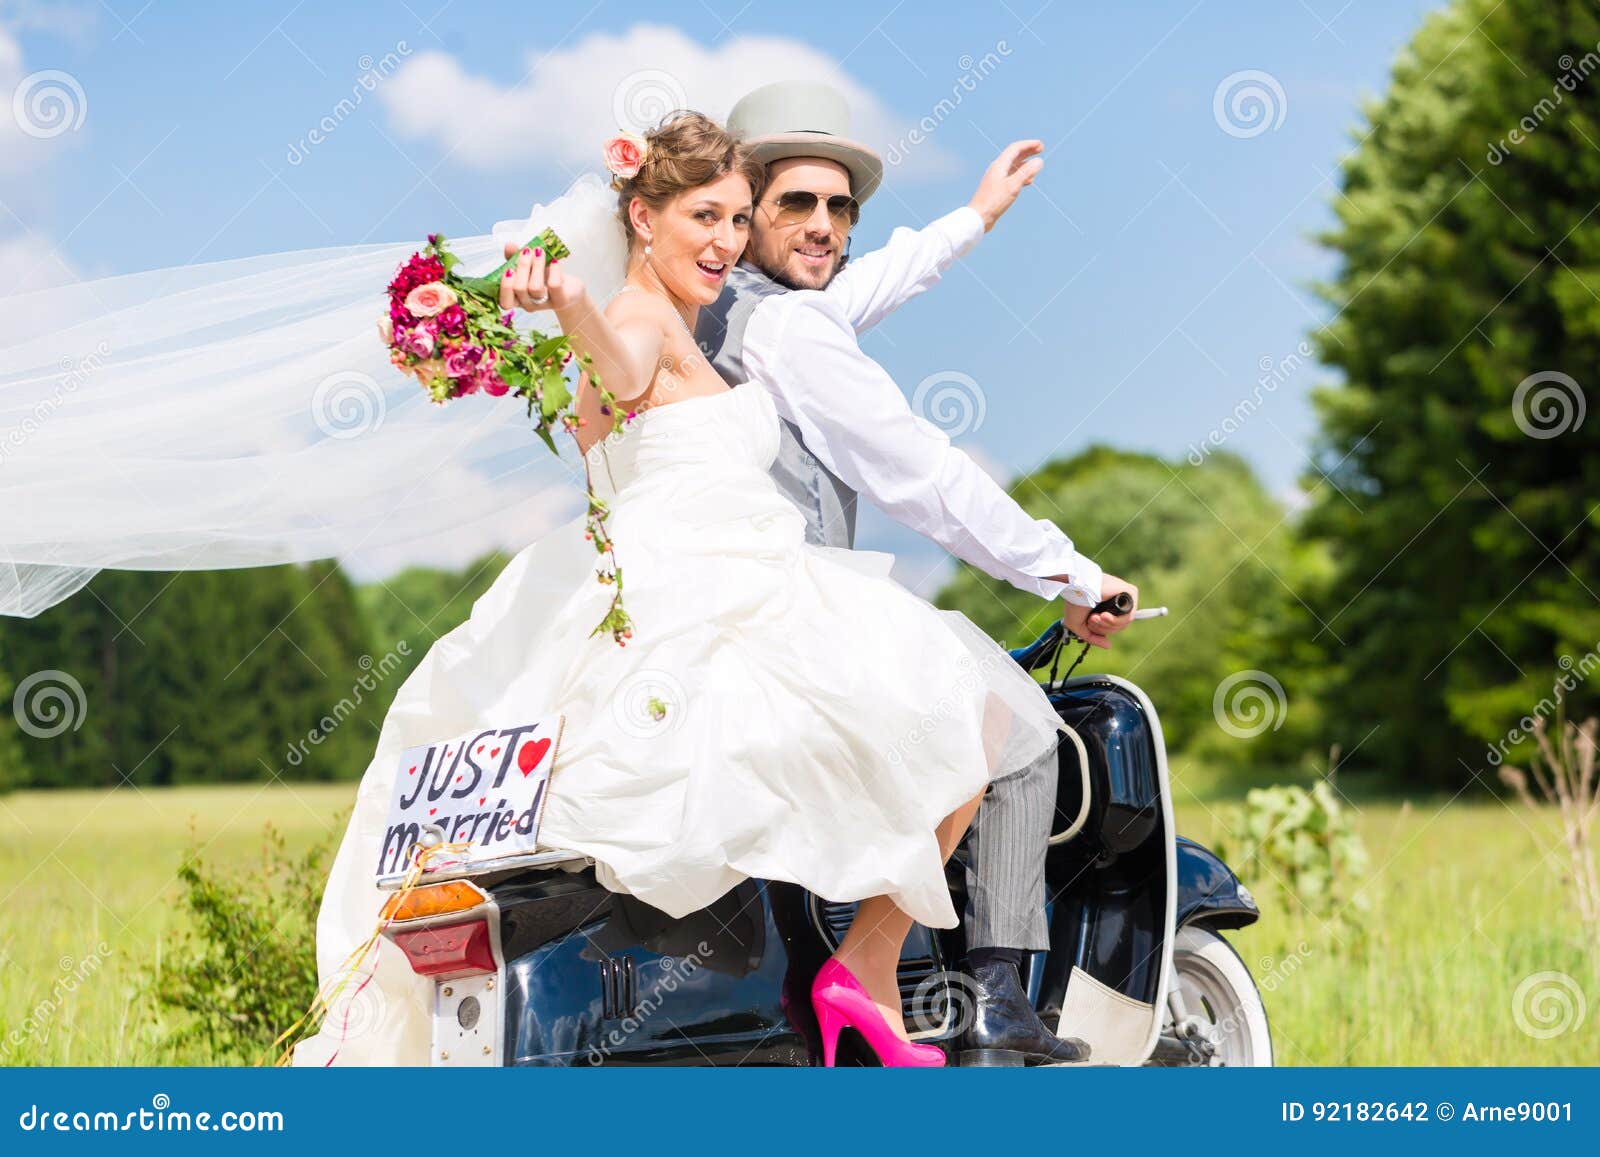 wedding couple on motor scooter just married